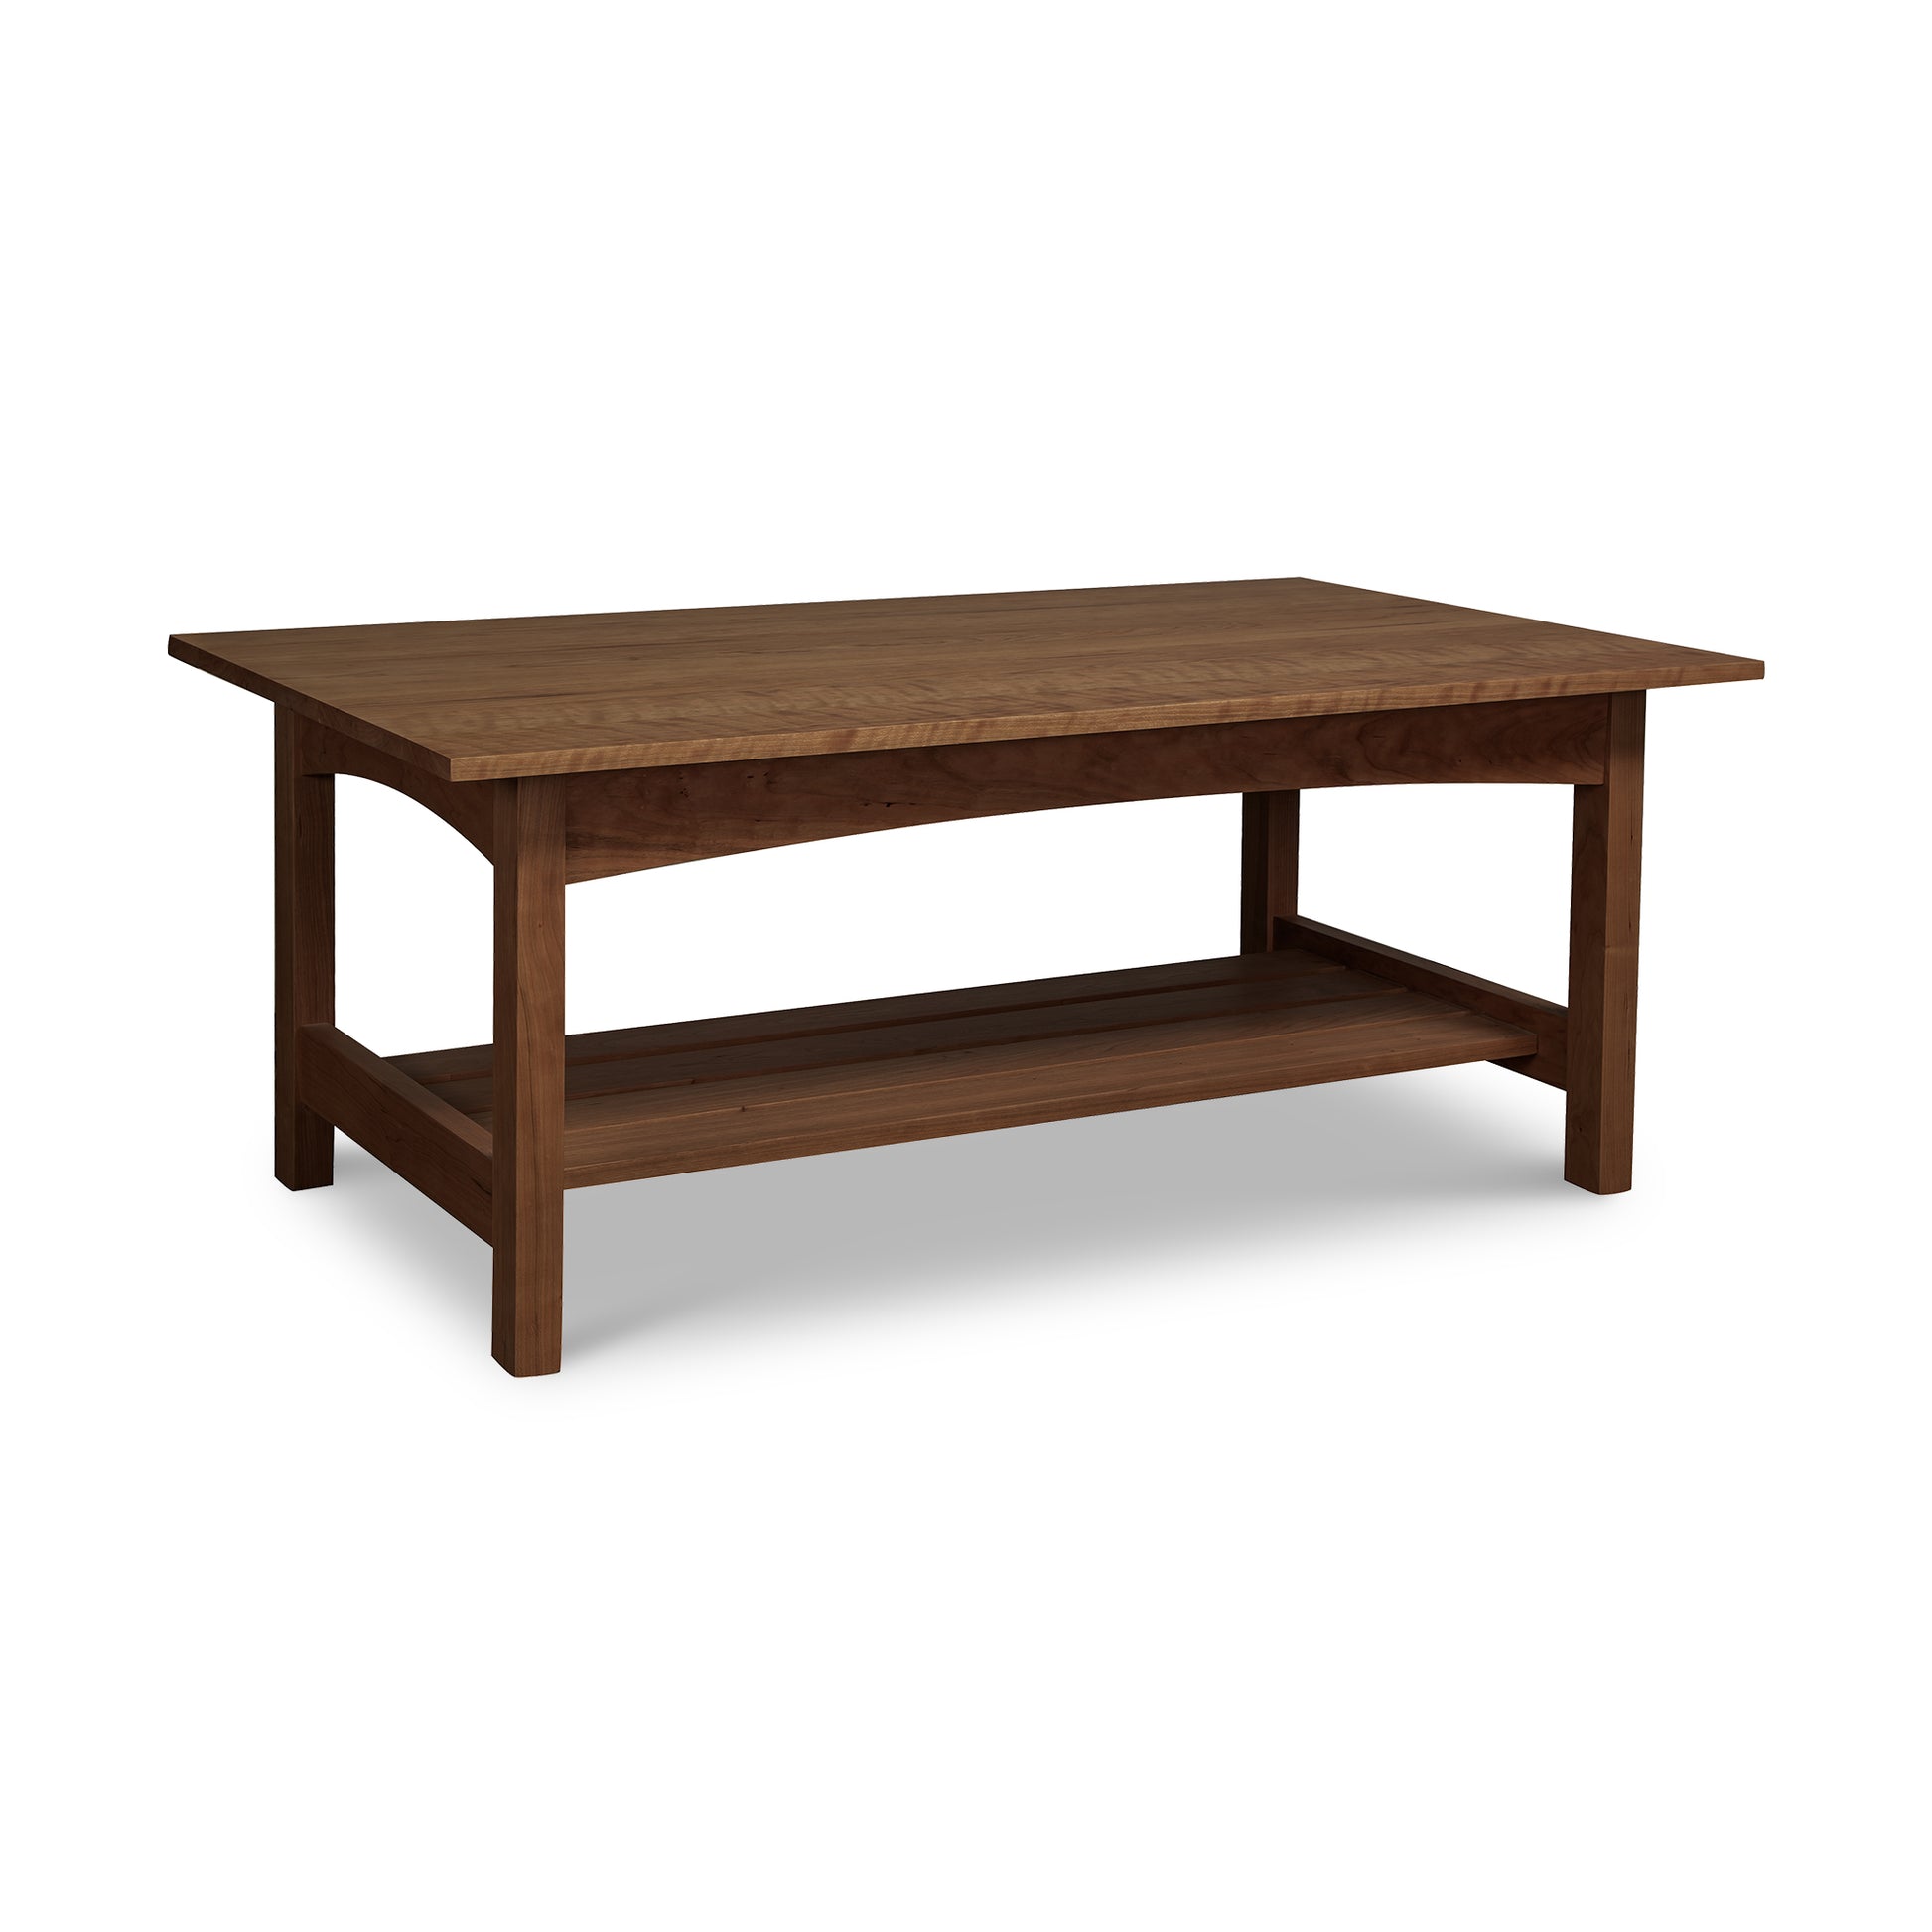 A handmade Vermont Furniture Designs Burlington Shaker coffee table crafted from solid wood, featuring a shelf on top.